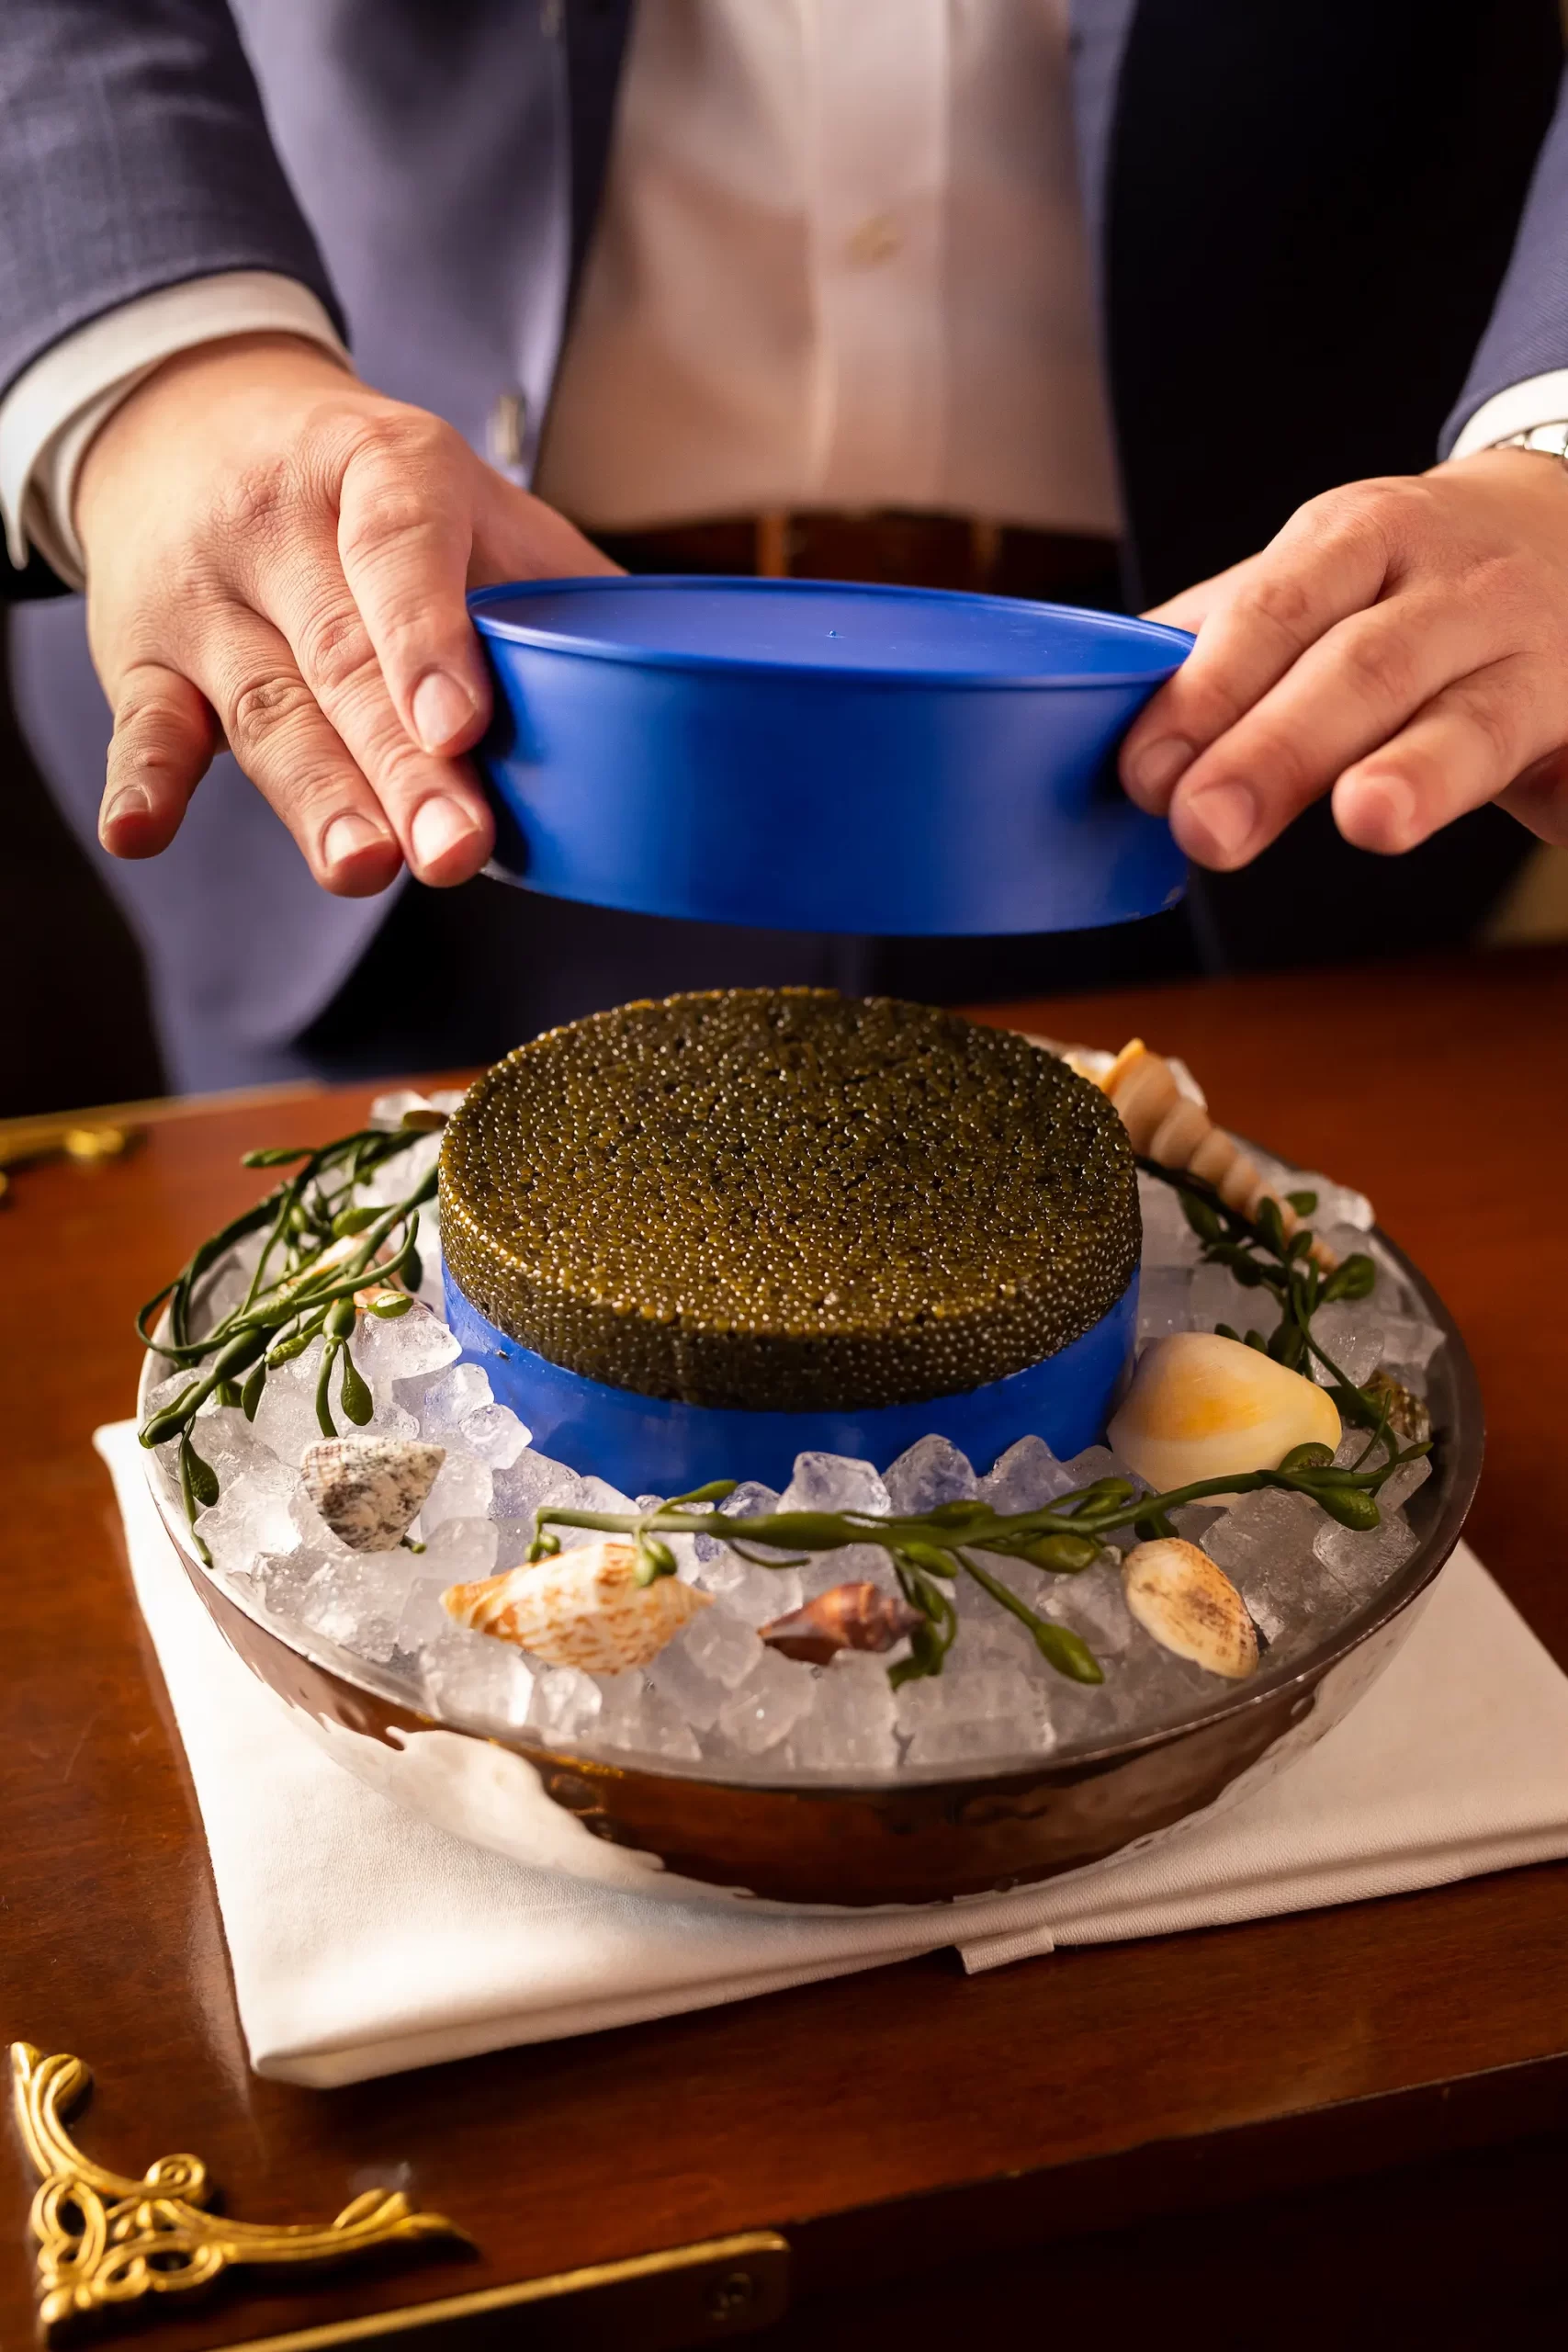 Caviar on ice, elegantly presented in a restaurant setting.